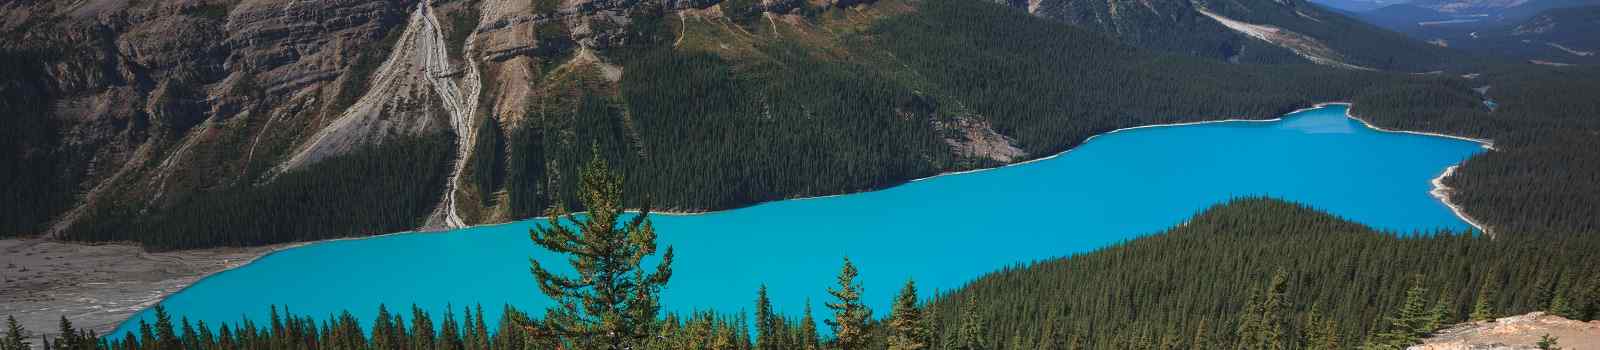 PARKS-WEST Peyto Lake in Banff Canada shutterstock 538033426